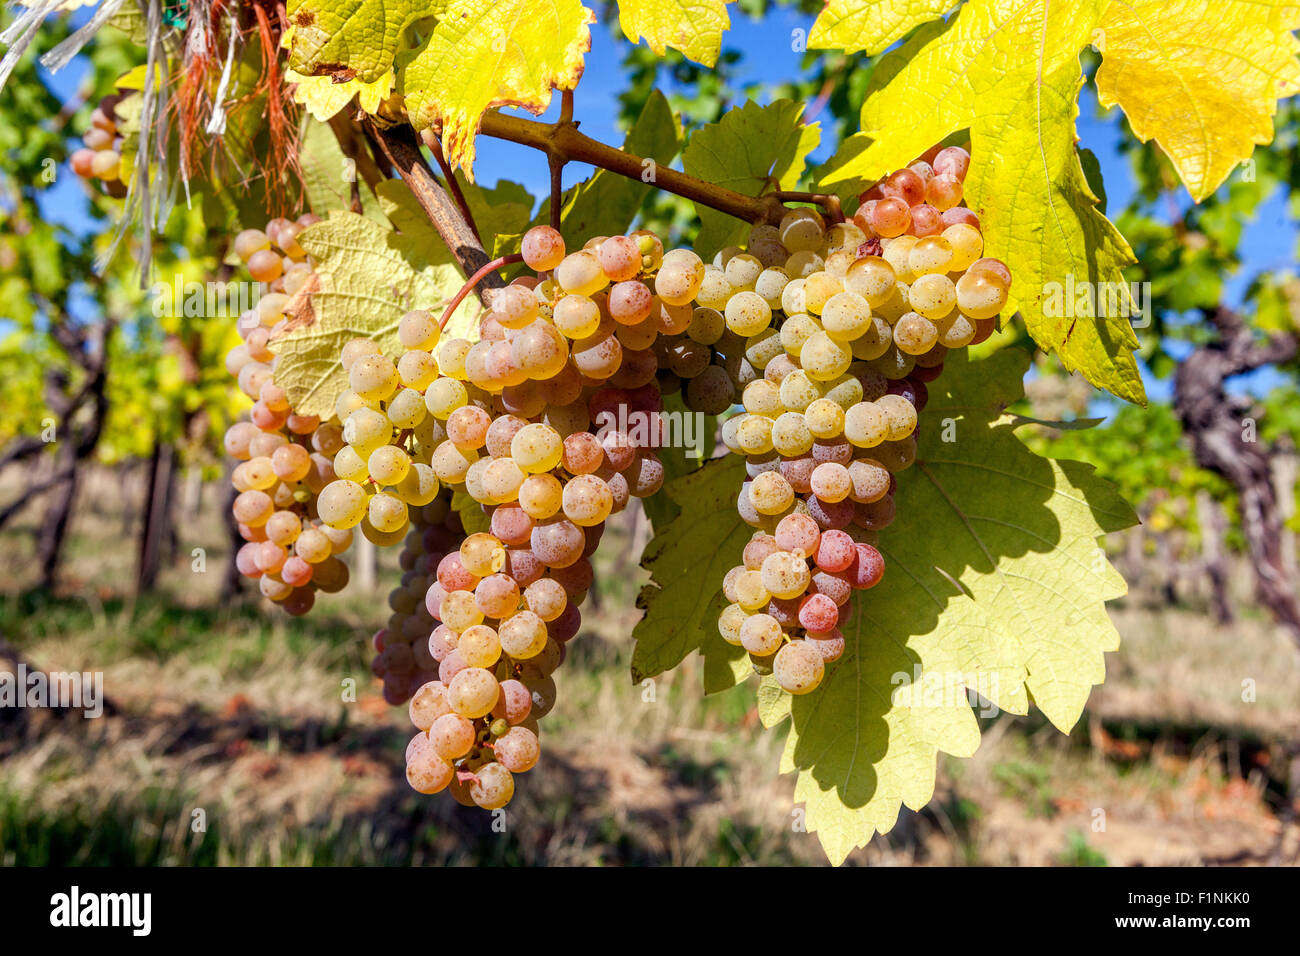 Bunch of grapes on vine, Wine region Slovacko, South Moravia, Czech Republic, Europe vineyard wine grapes in plant Grapes growing Stock Photo